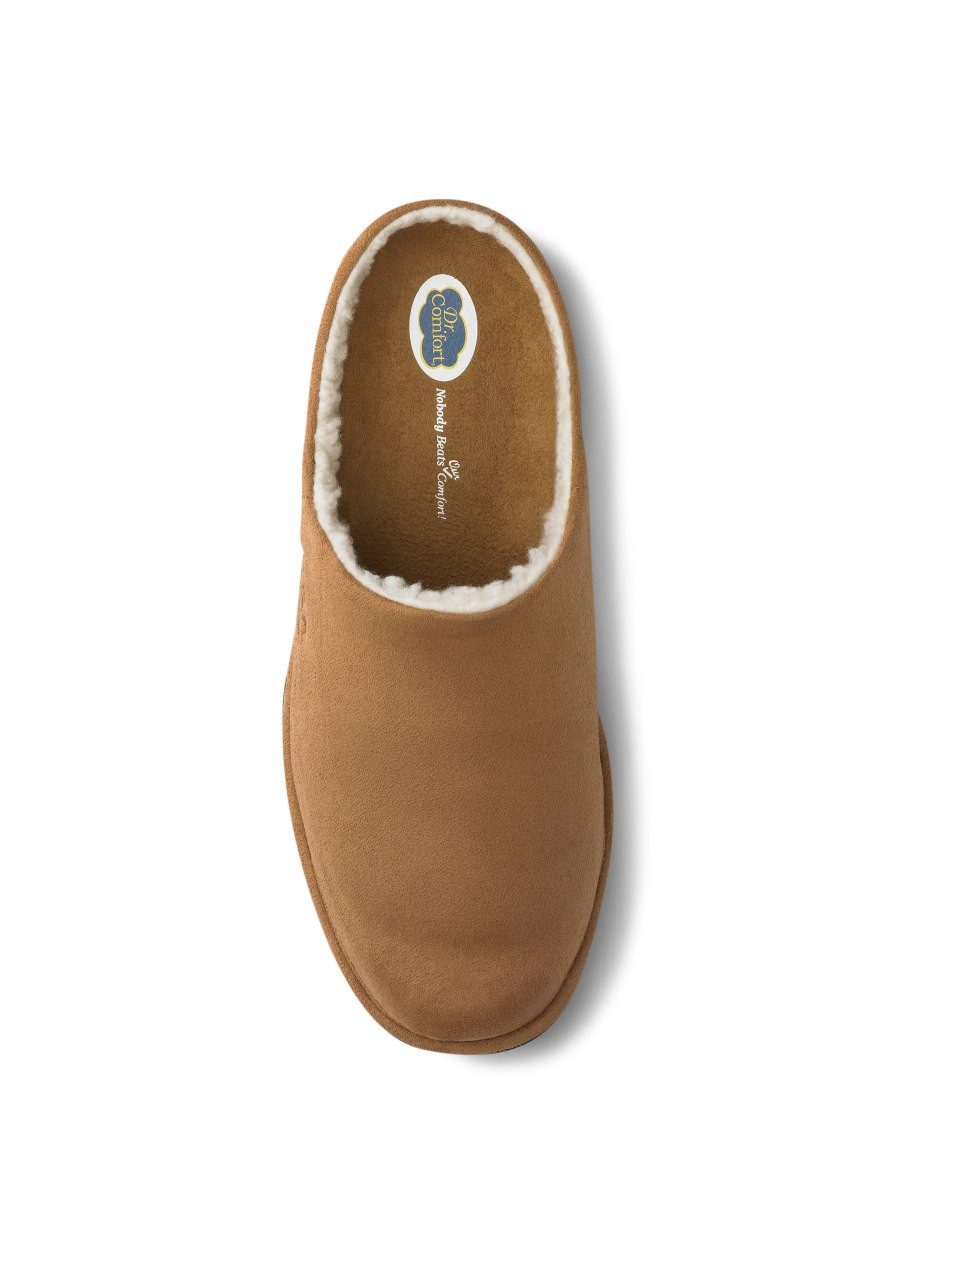 Best Slippers With Arch Support - Slippers for Plantar Fasciitis